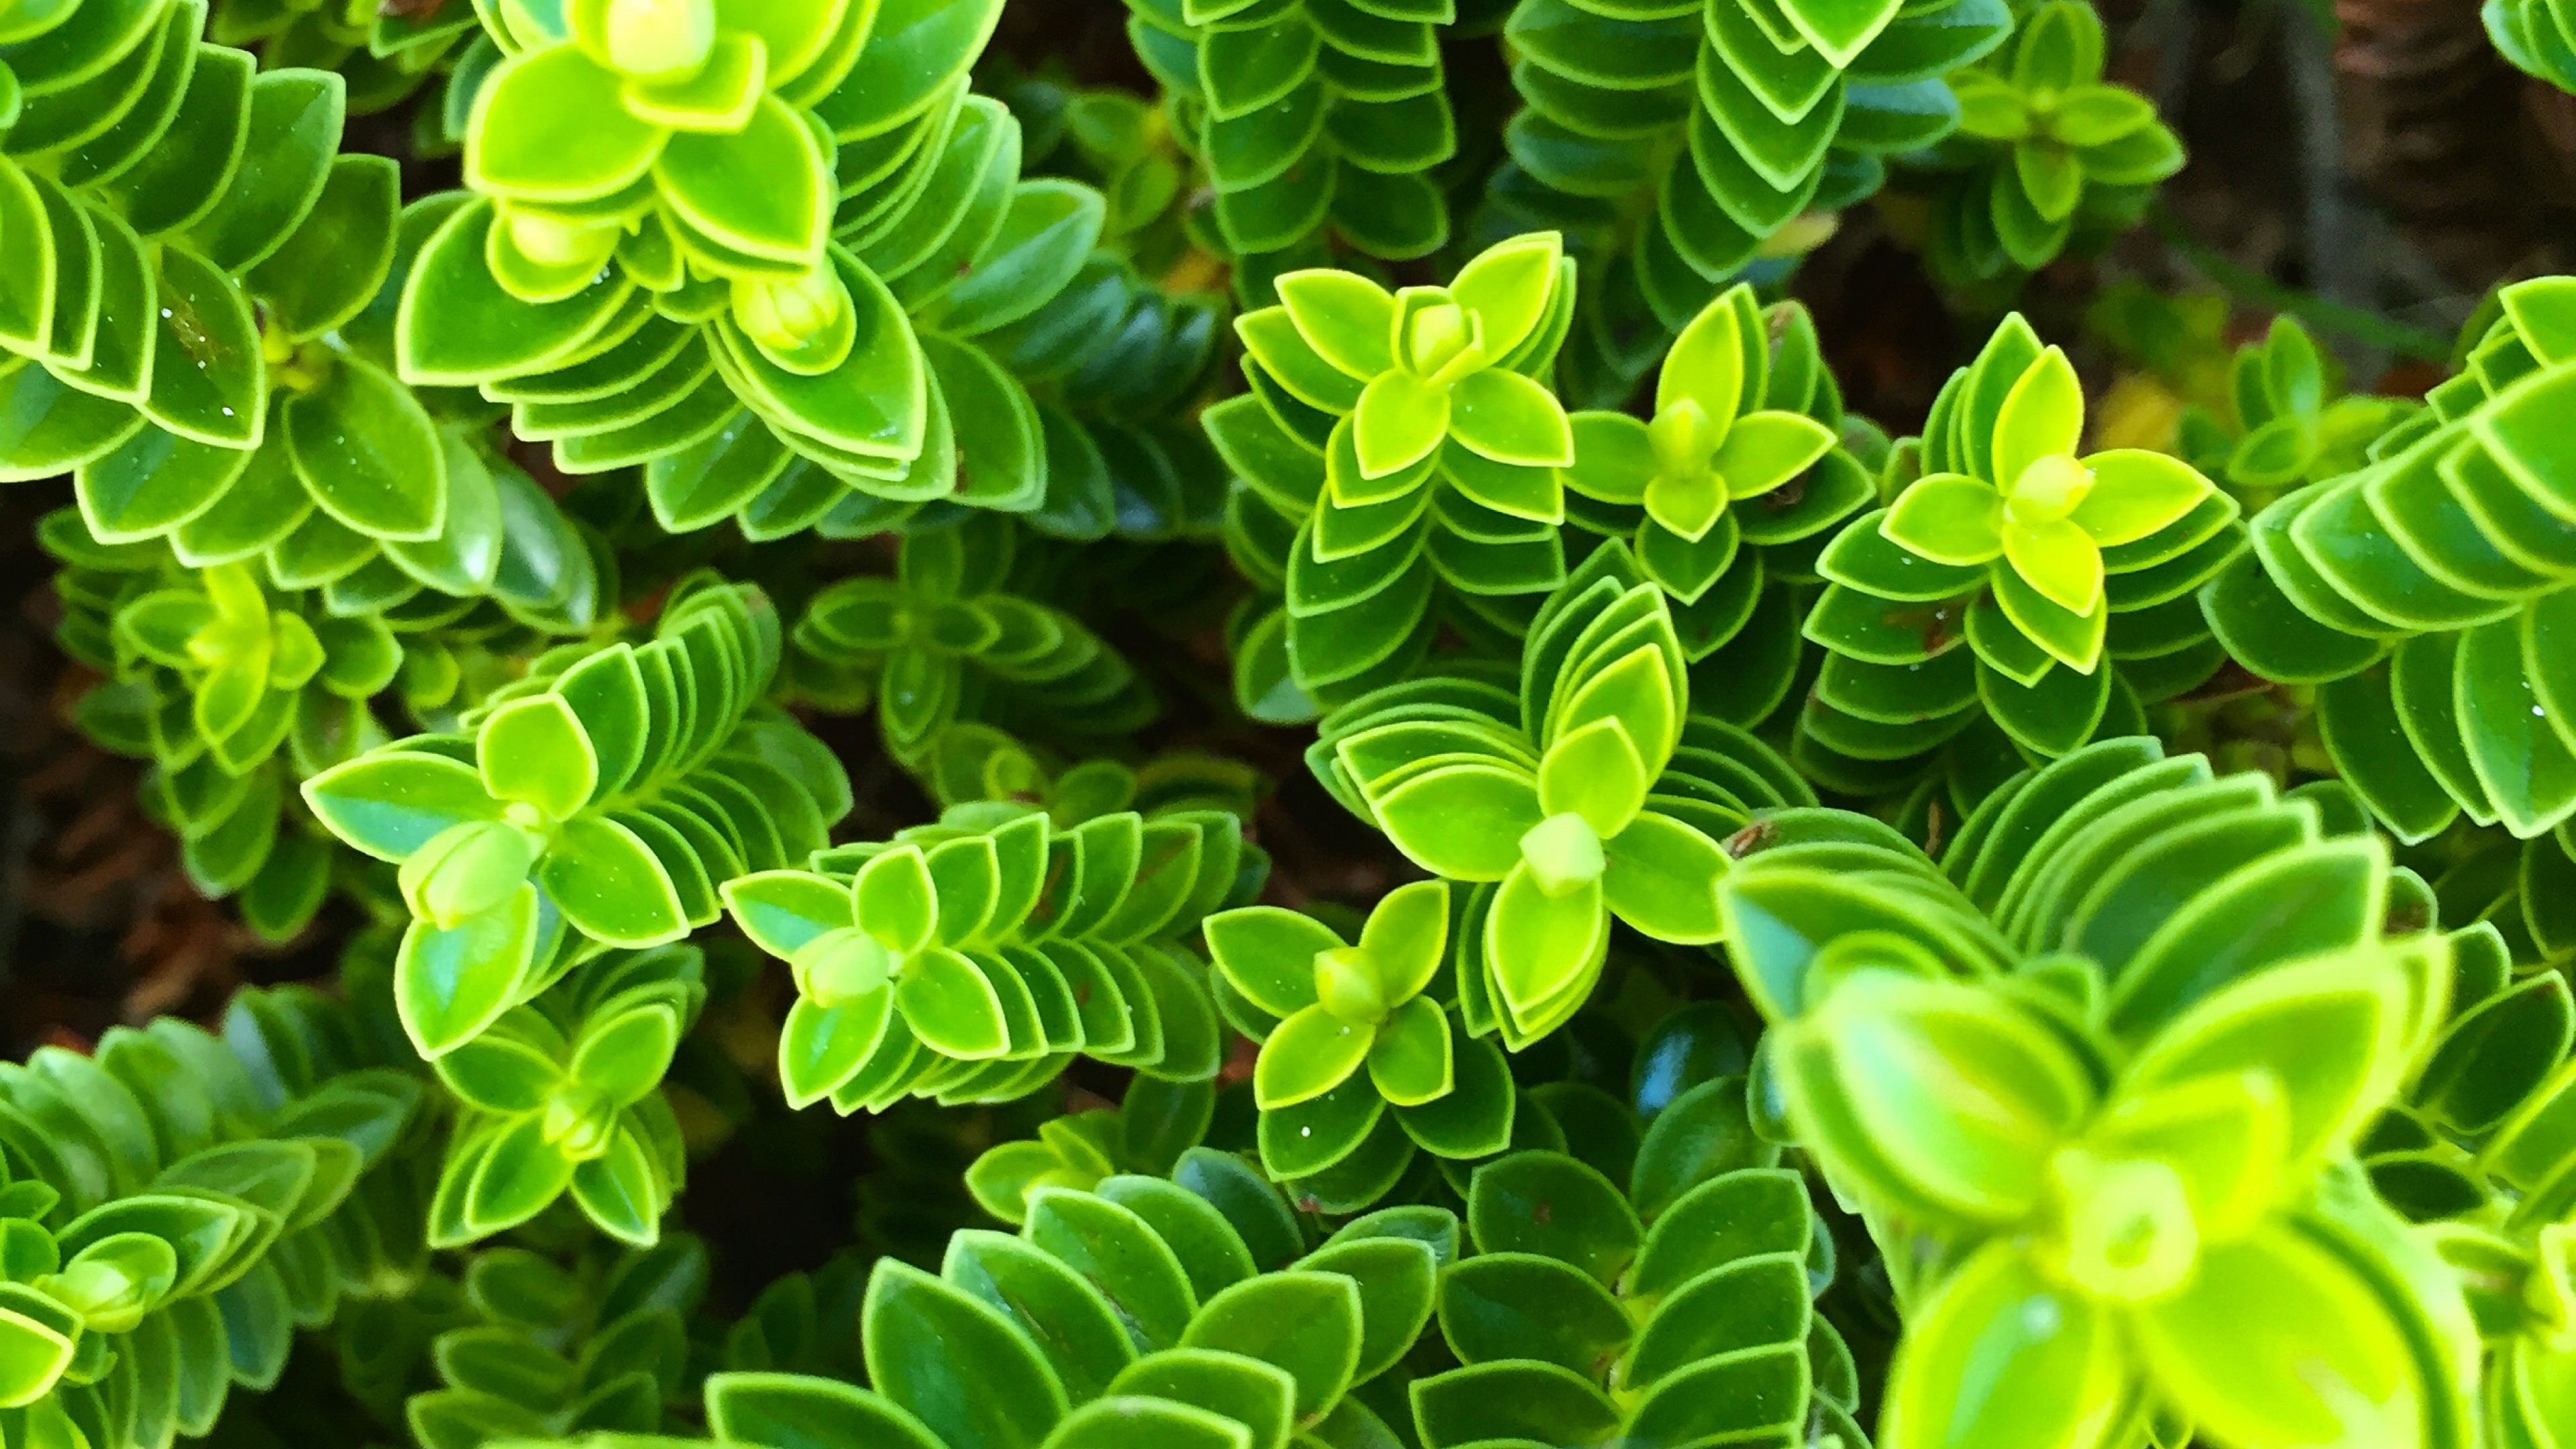 100+] Plant 4k Wallpapers | Wallpapers.com